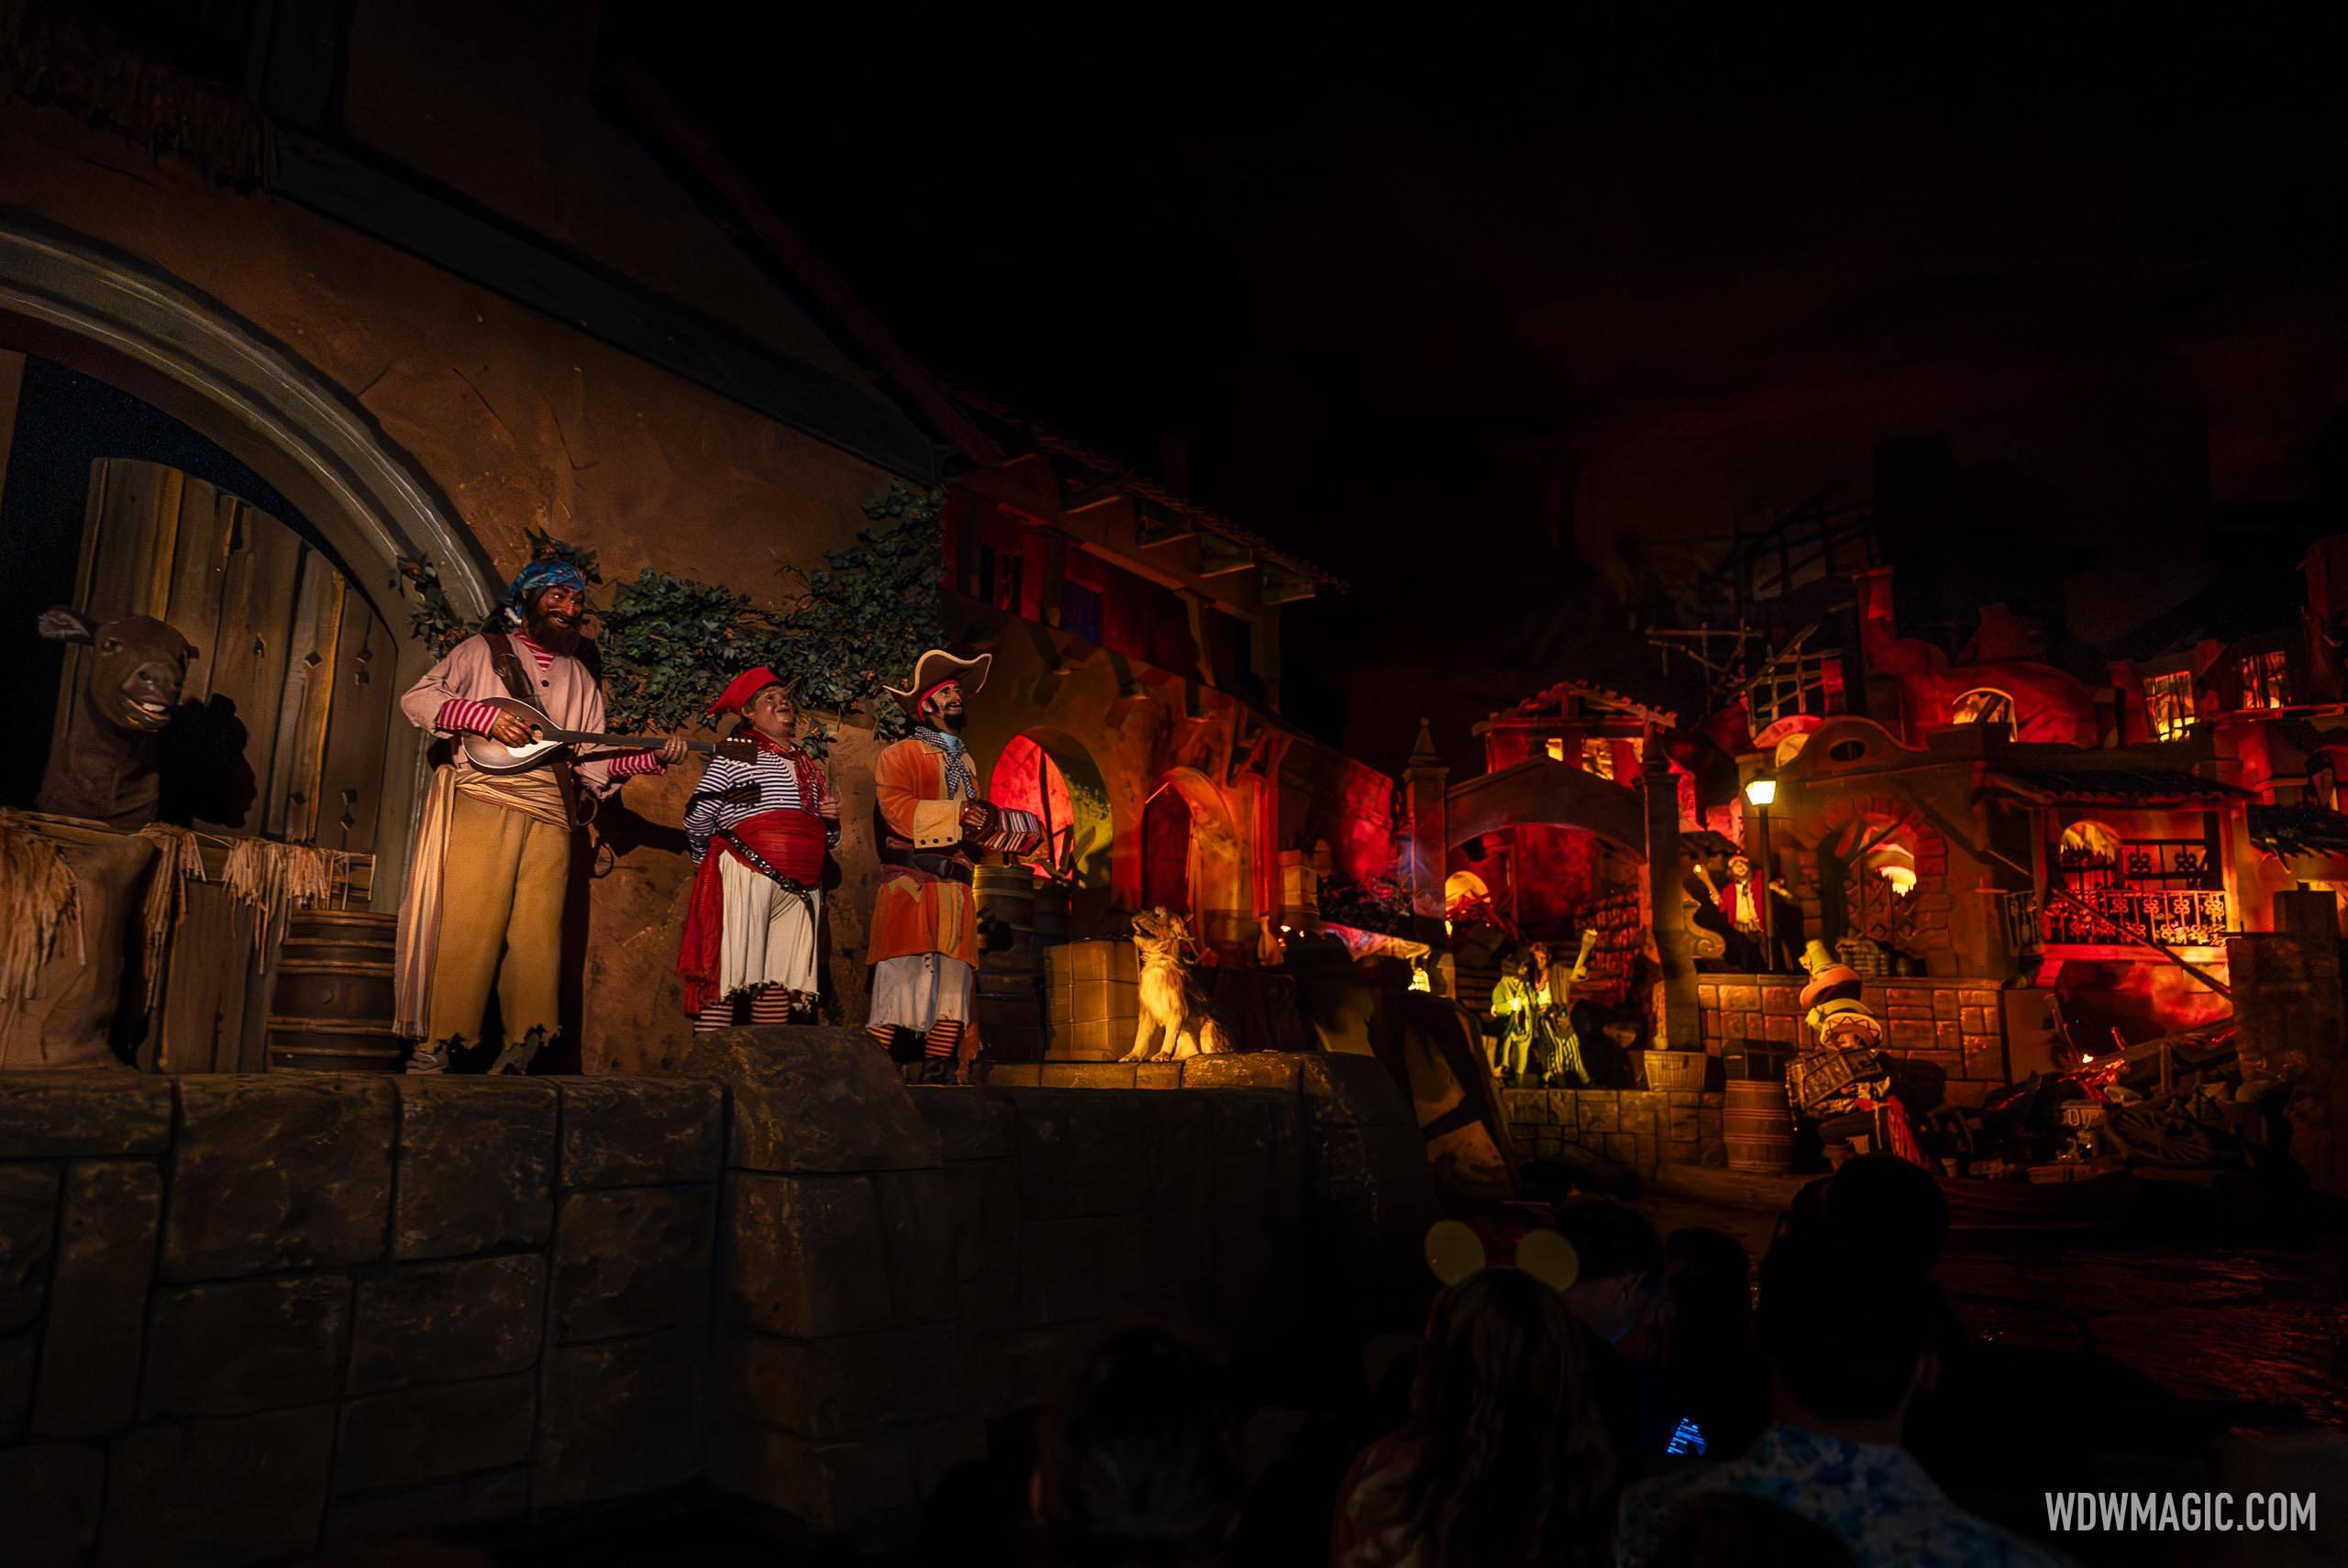 Angelica from 'Pirates of the Caribbean - On Stranger Tides' to meet and greet at the Magic Kingdom